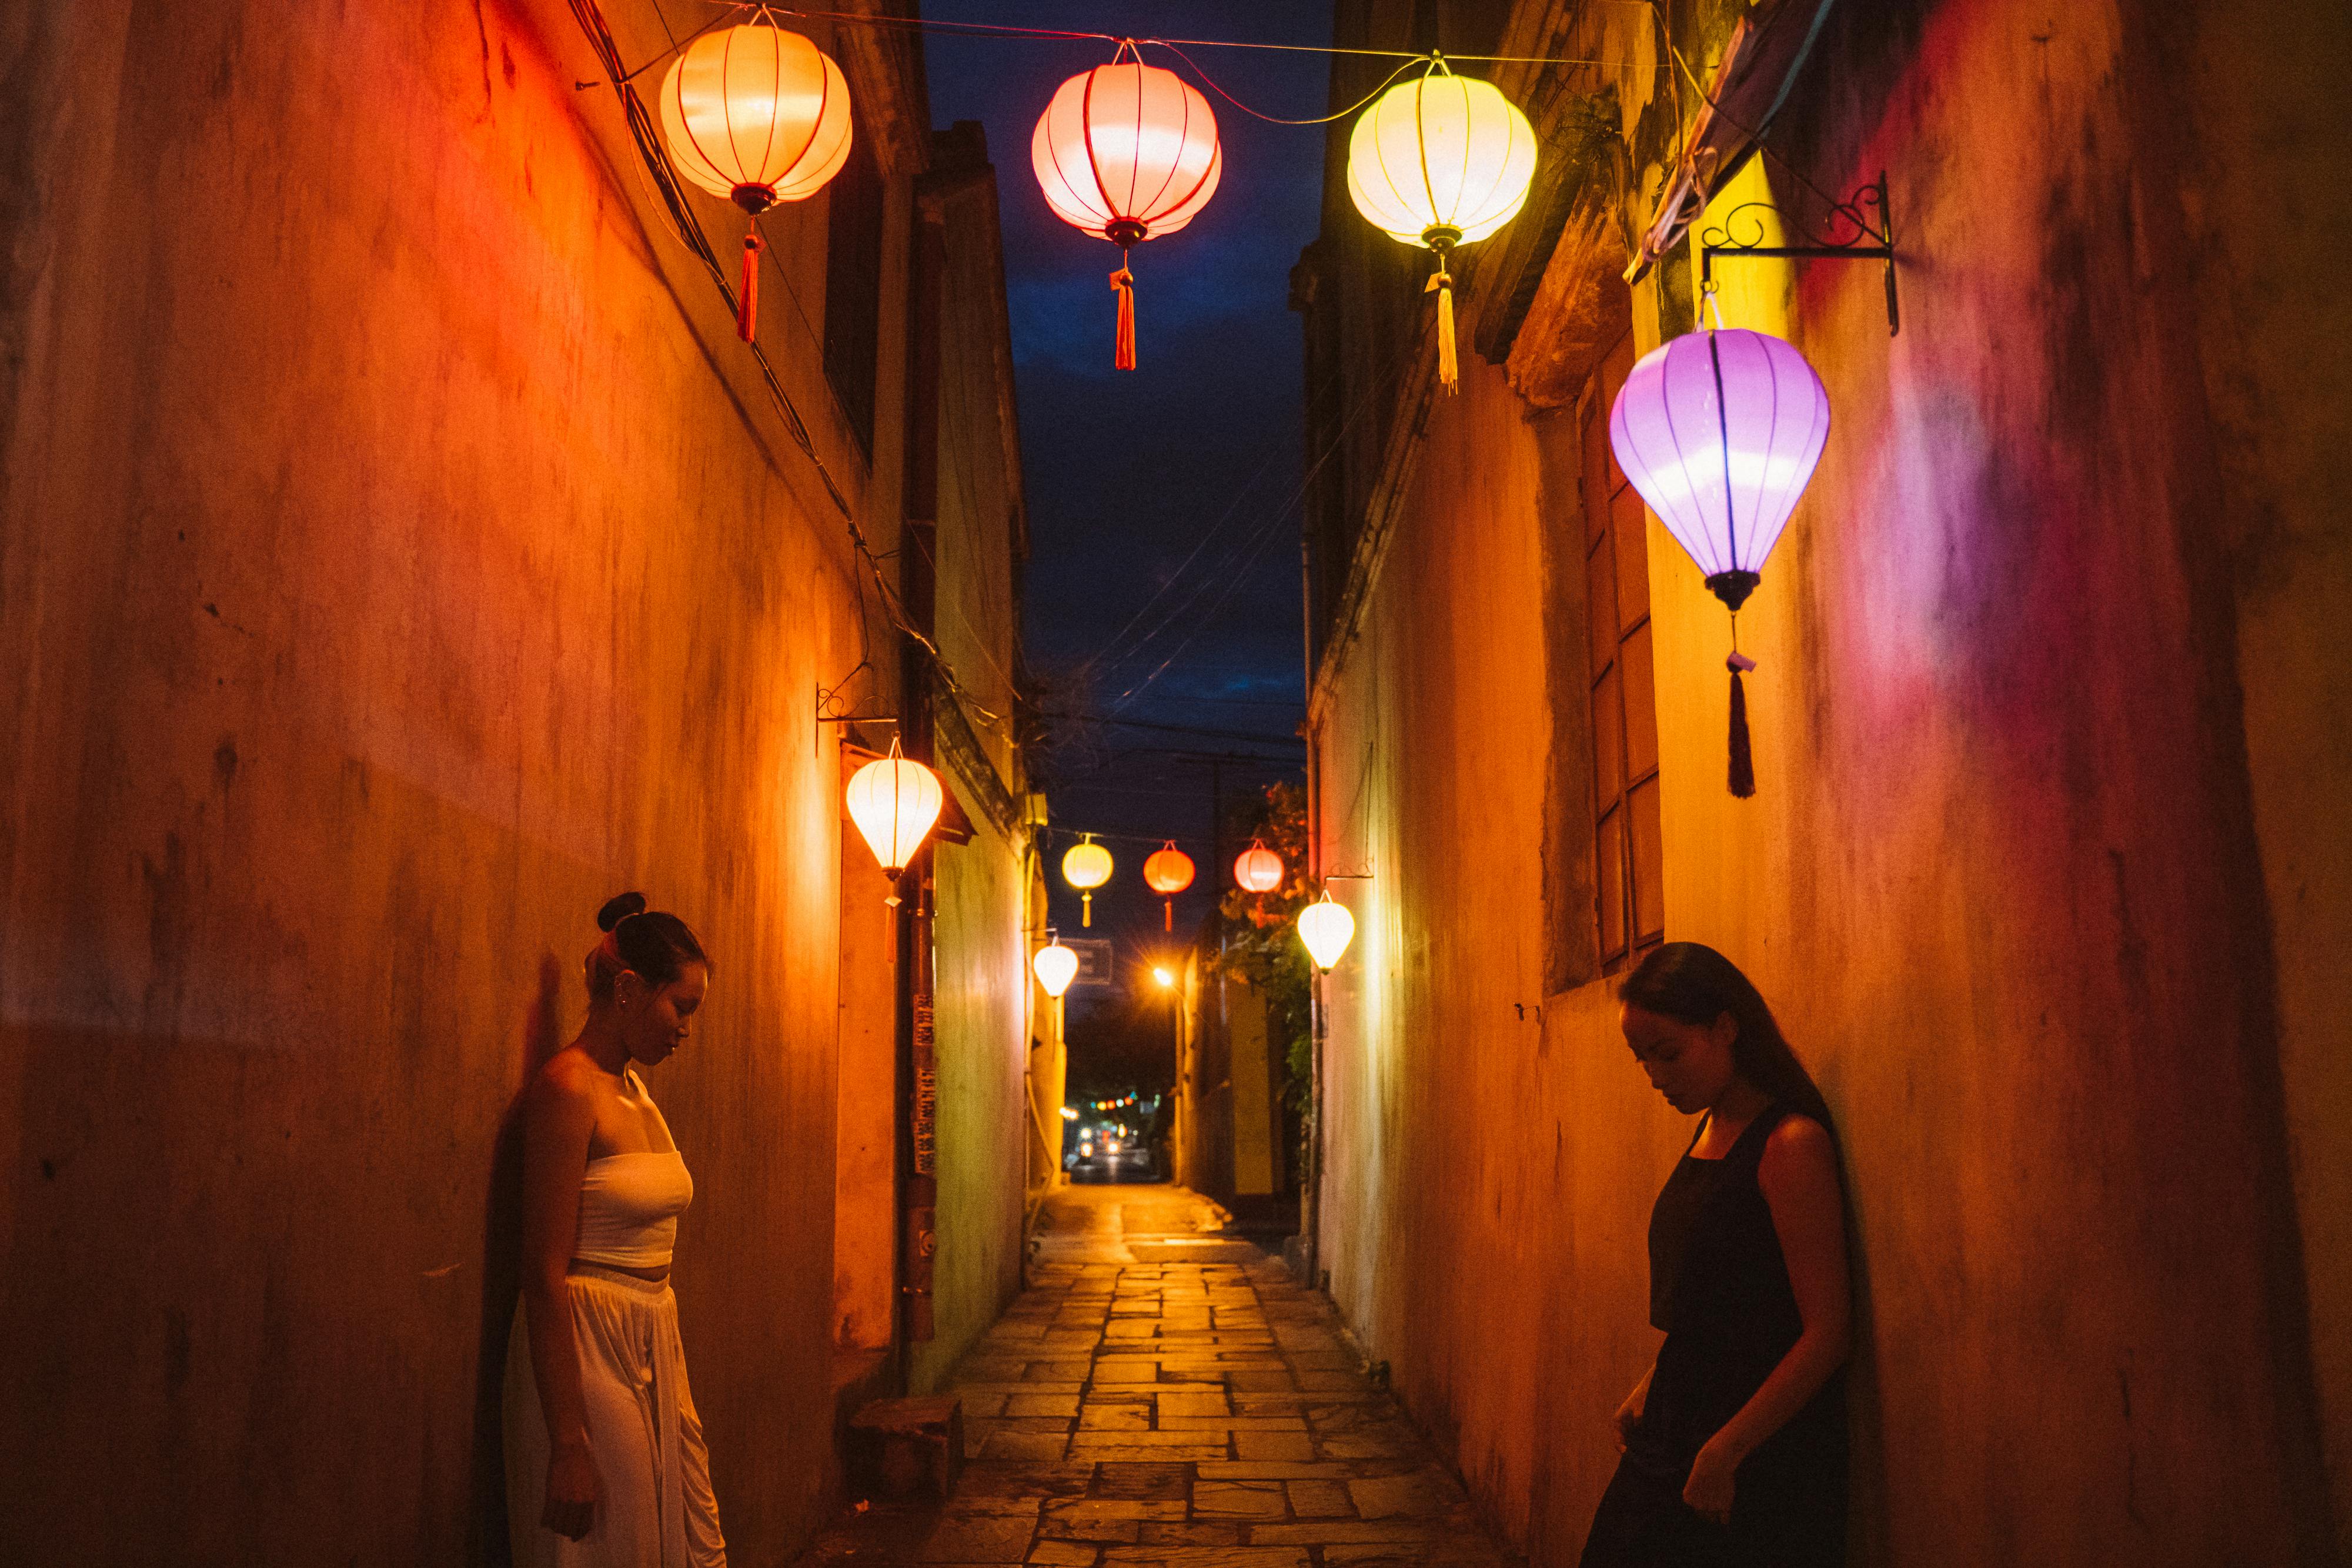 Two women in a deserted alley | Source: Pexels